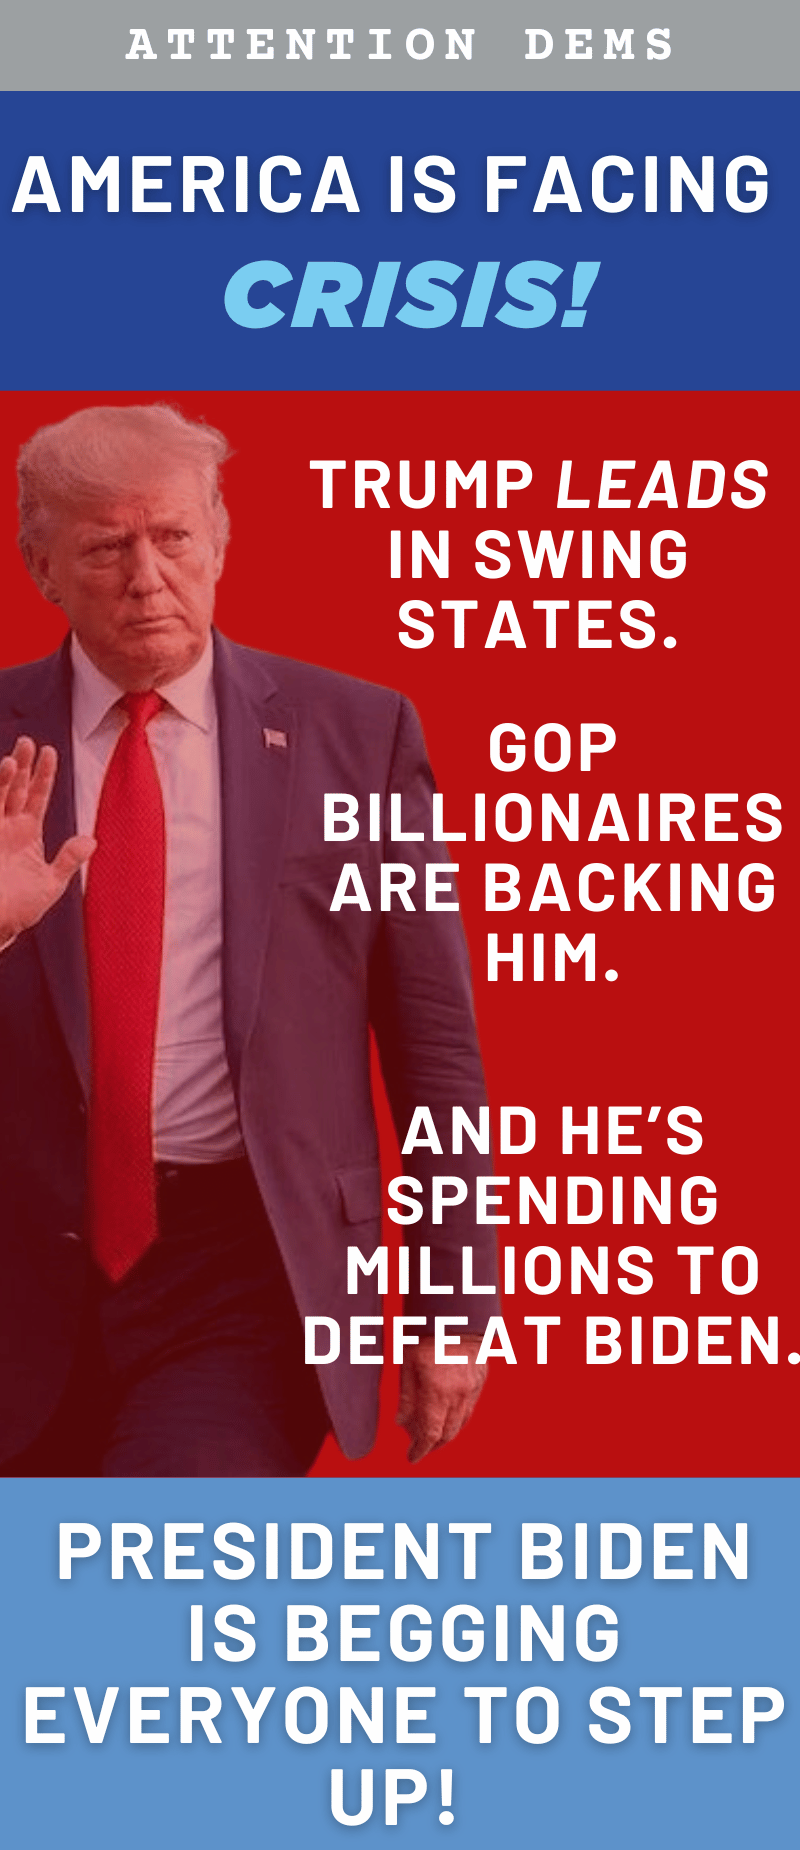 America is facing a crisis. Trump leads the swing states. GOP billionaires are backing him. And he's spending MILLIONS to defeat Biden. 